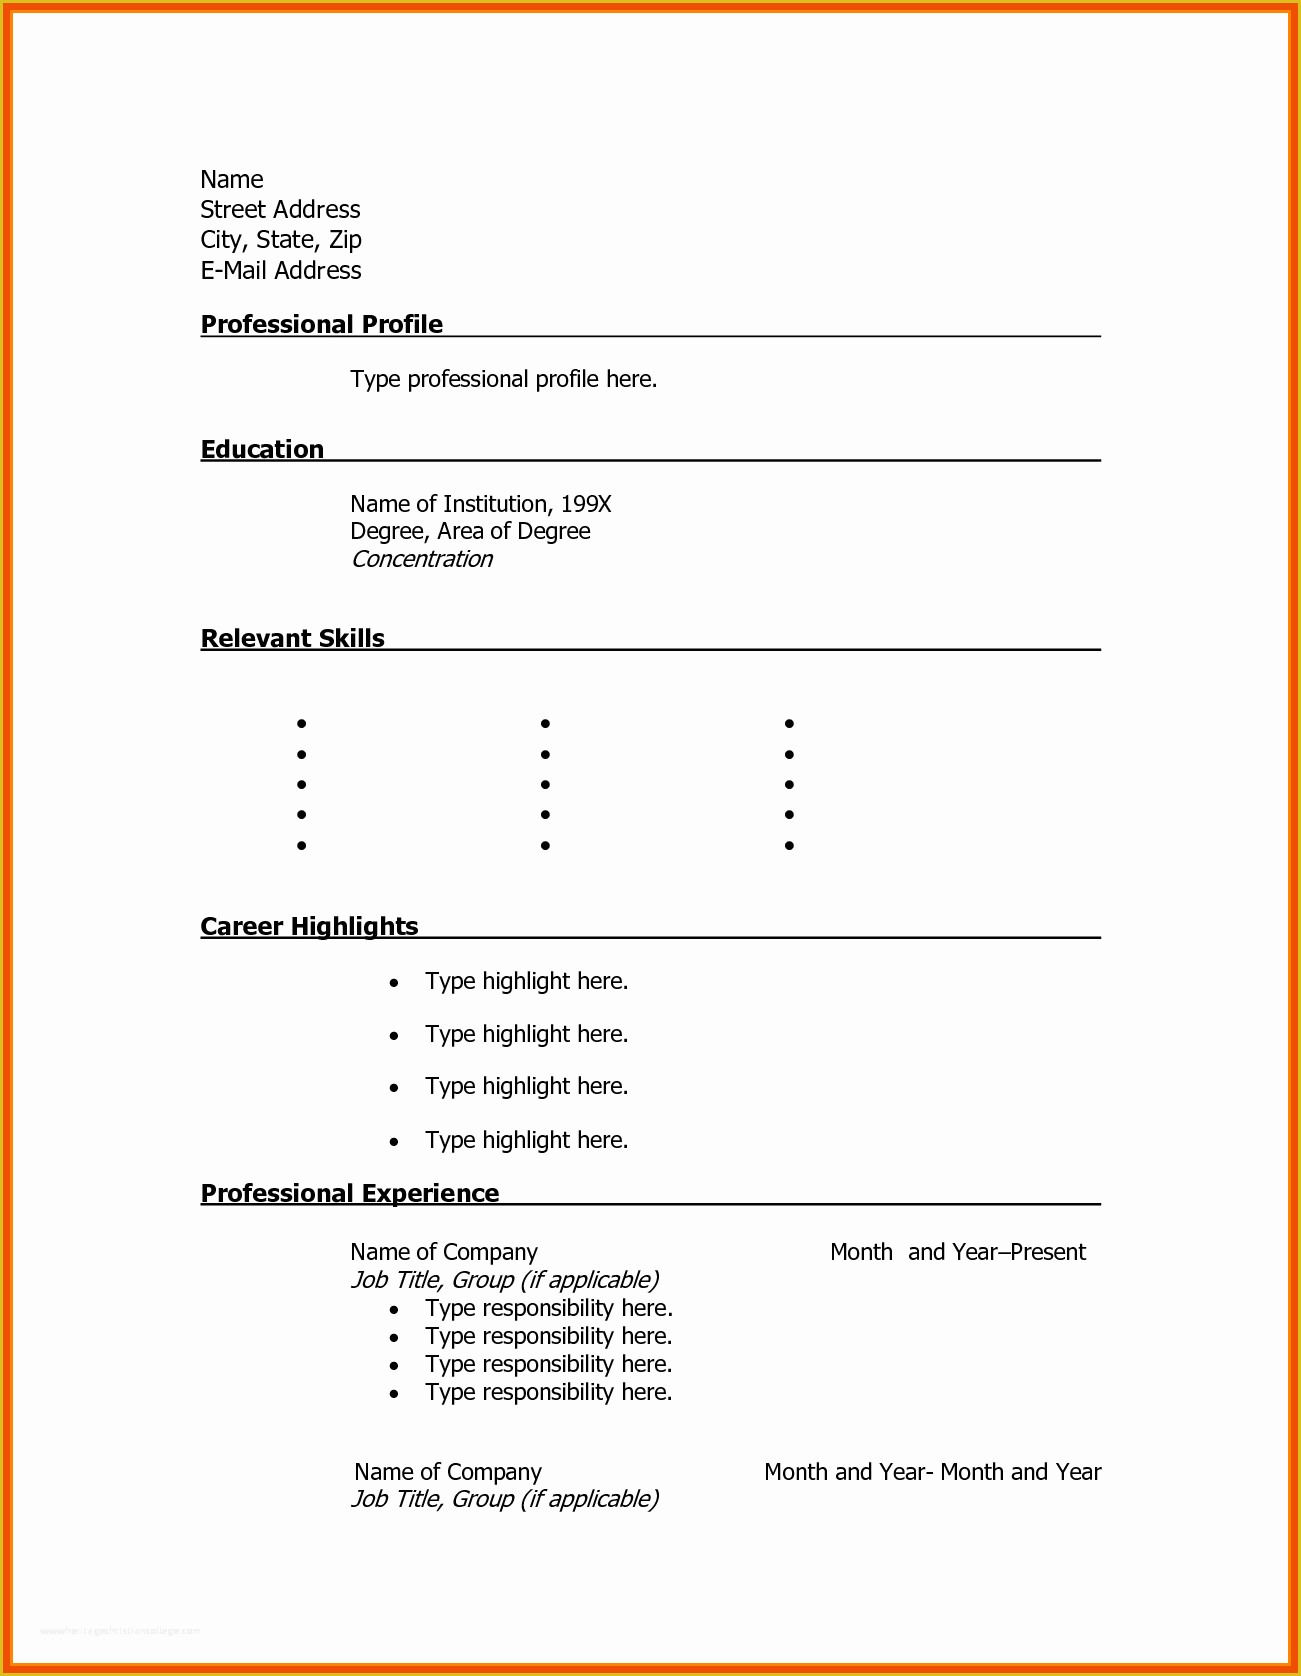 Free Printable Professional Resume Templates Of 7 8 Blank Professional Resume formats